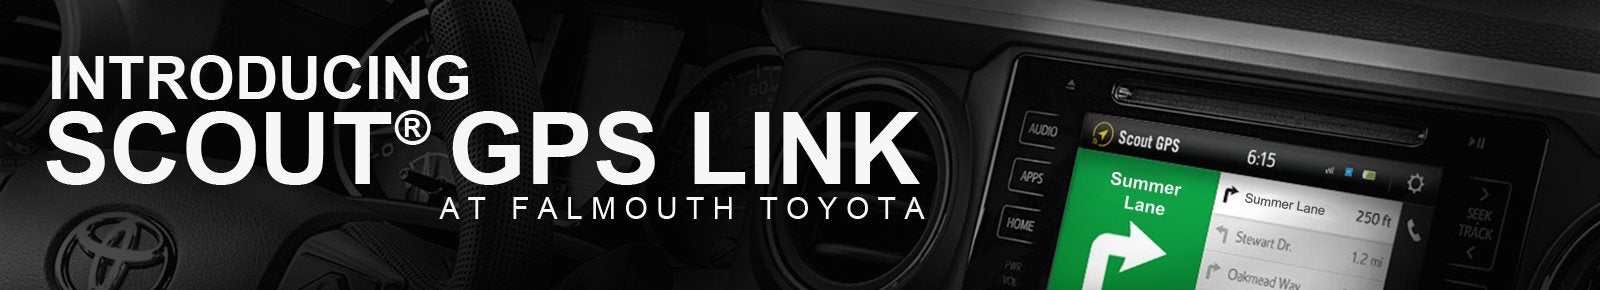 Scout® GPS Link Available in New Toyota's at Falmouth Toyota, Bourne, MA - Cape Cod Toyota Dealership